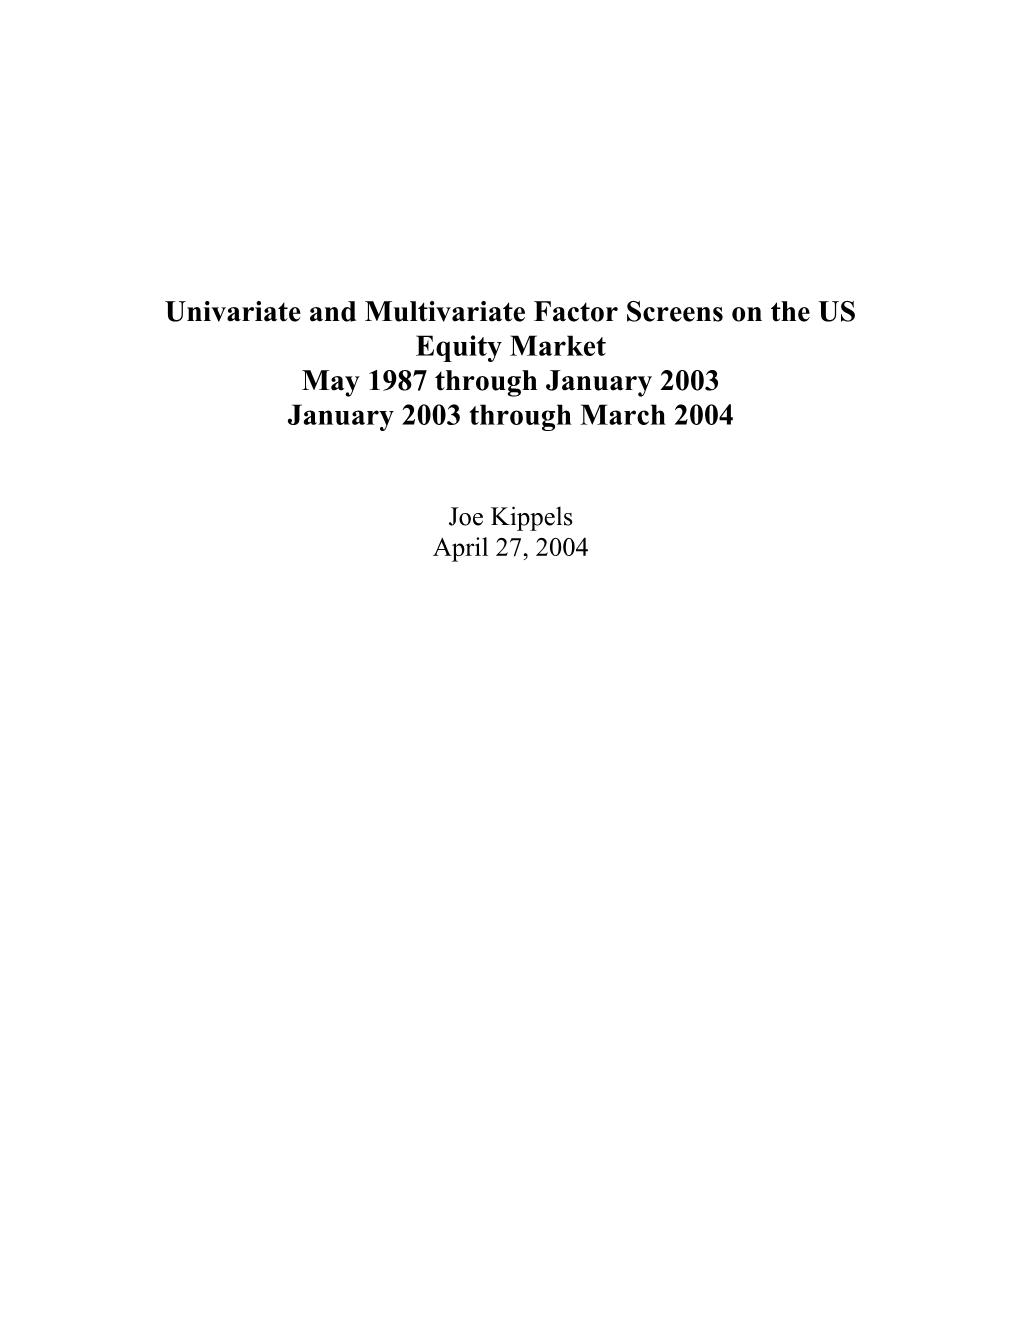 Univariate and Multivariate Factor Screens on the US Equity Market